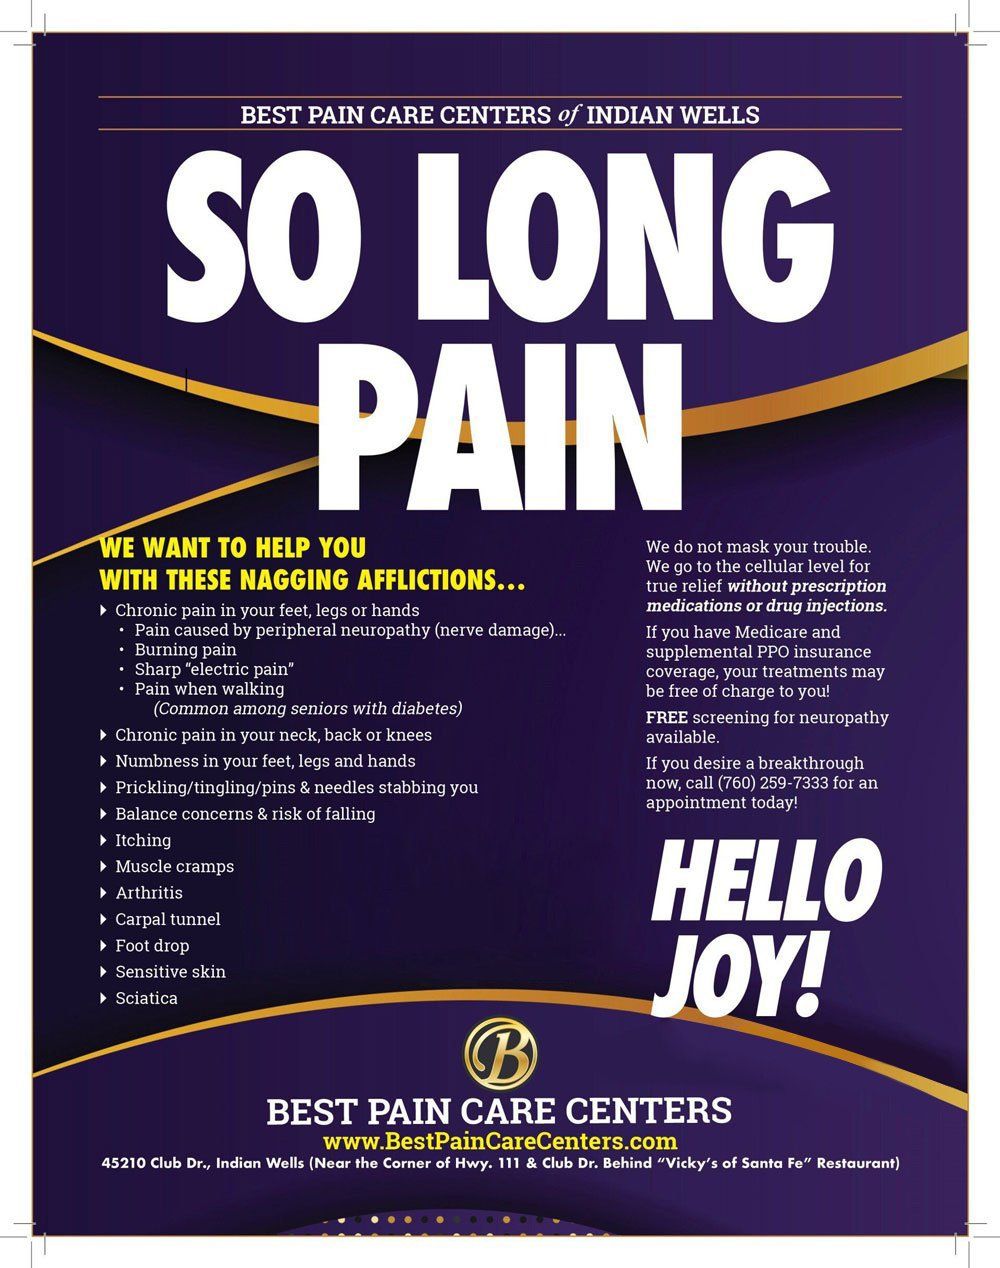 So Long Pain Ad — Indian Wells, CA — Best Pain Care Center